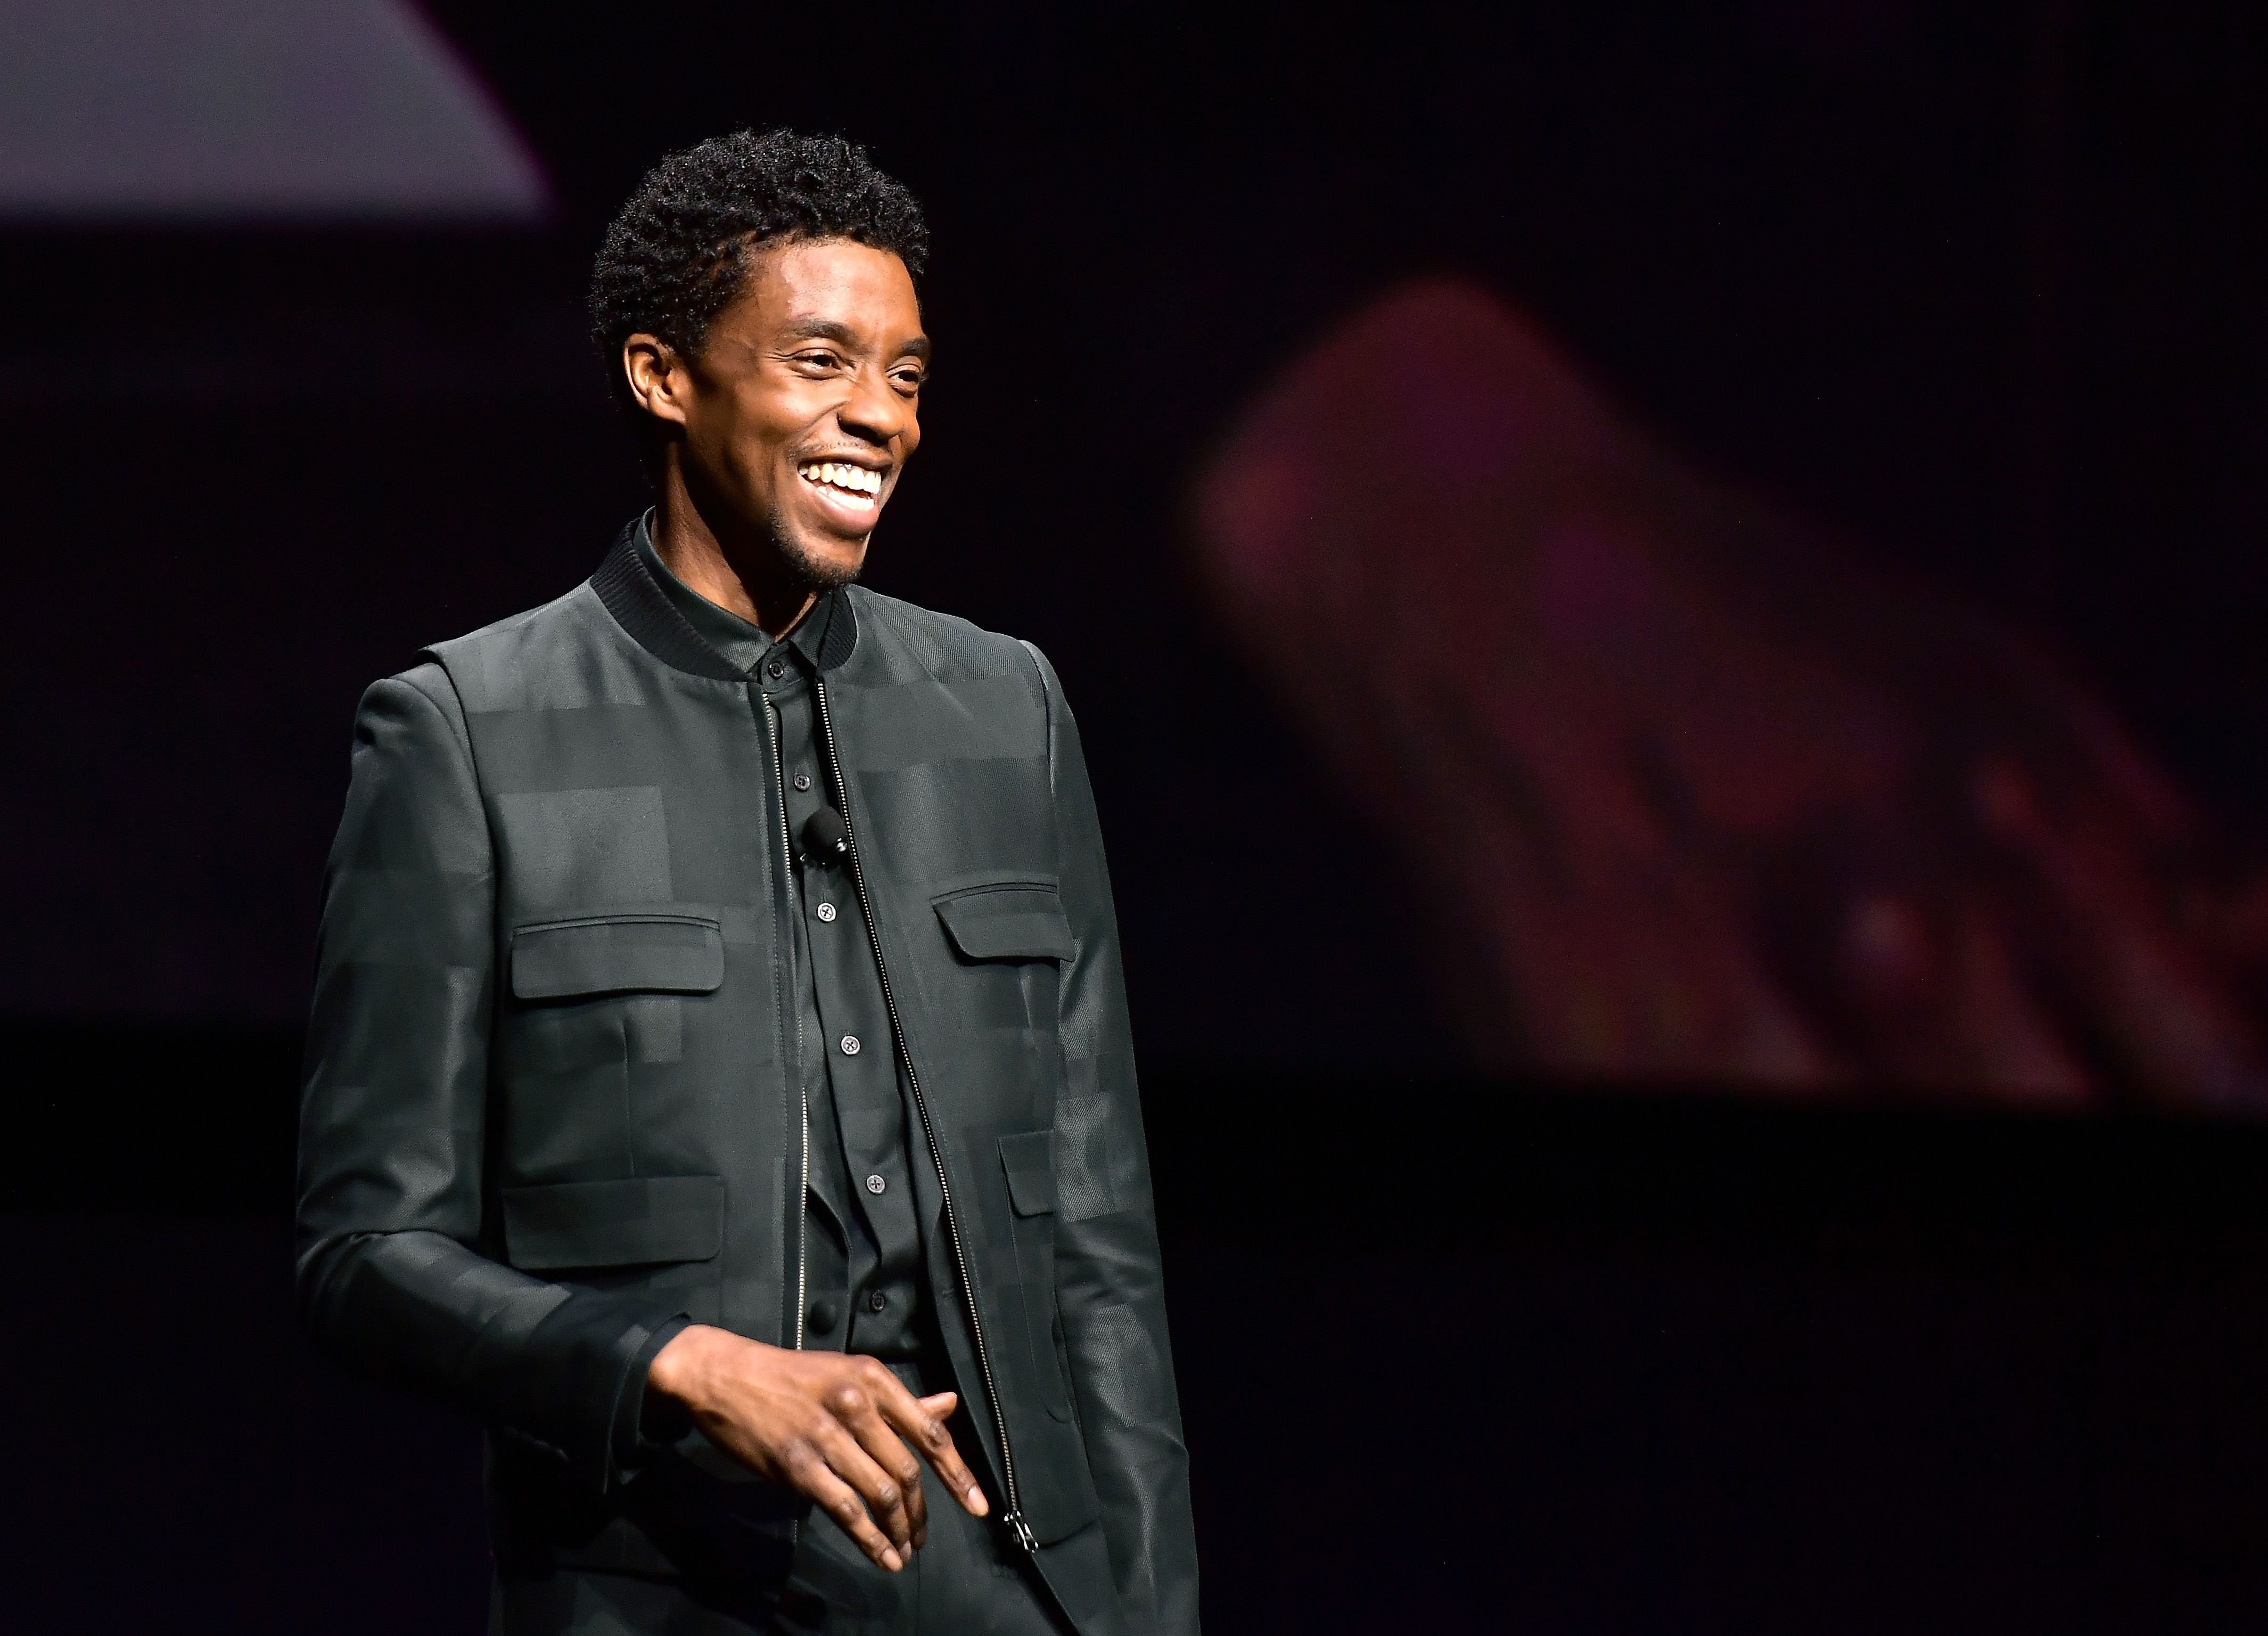 Chadwick Boseman speaks onstage at CinemaCon 2019 at The Colosseum at Caesars Palace on April 2, 2019 | Photo: Getty Images